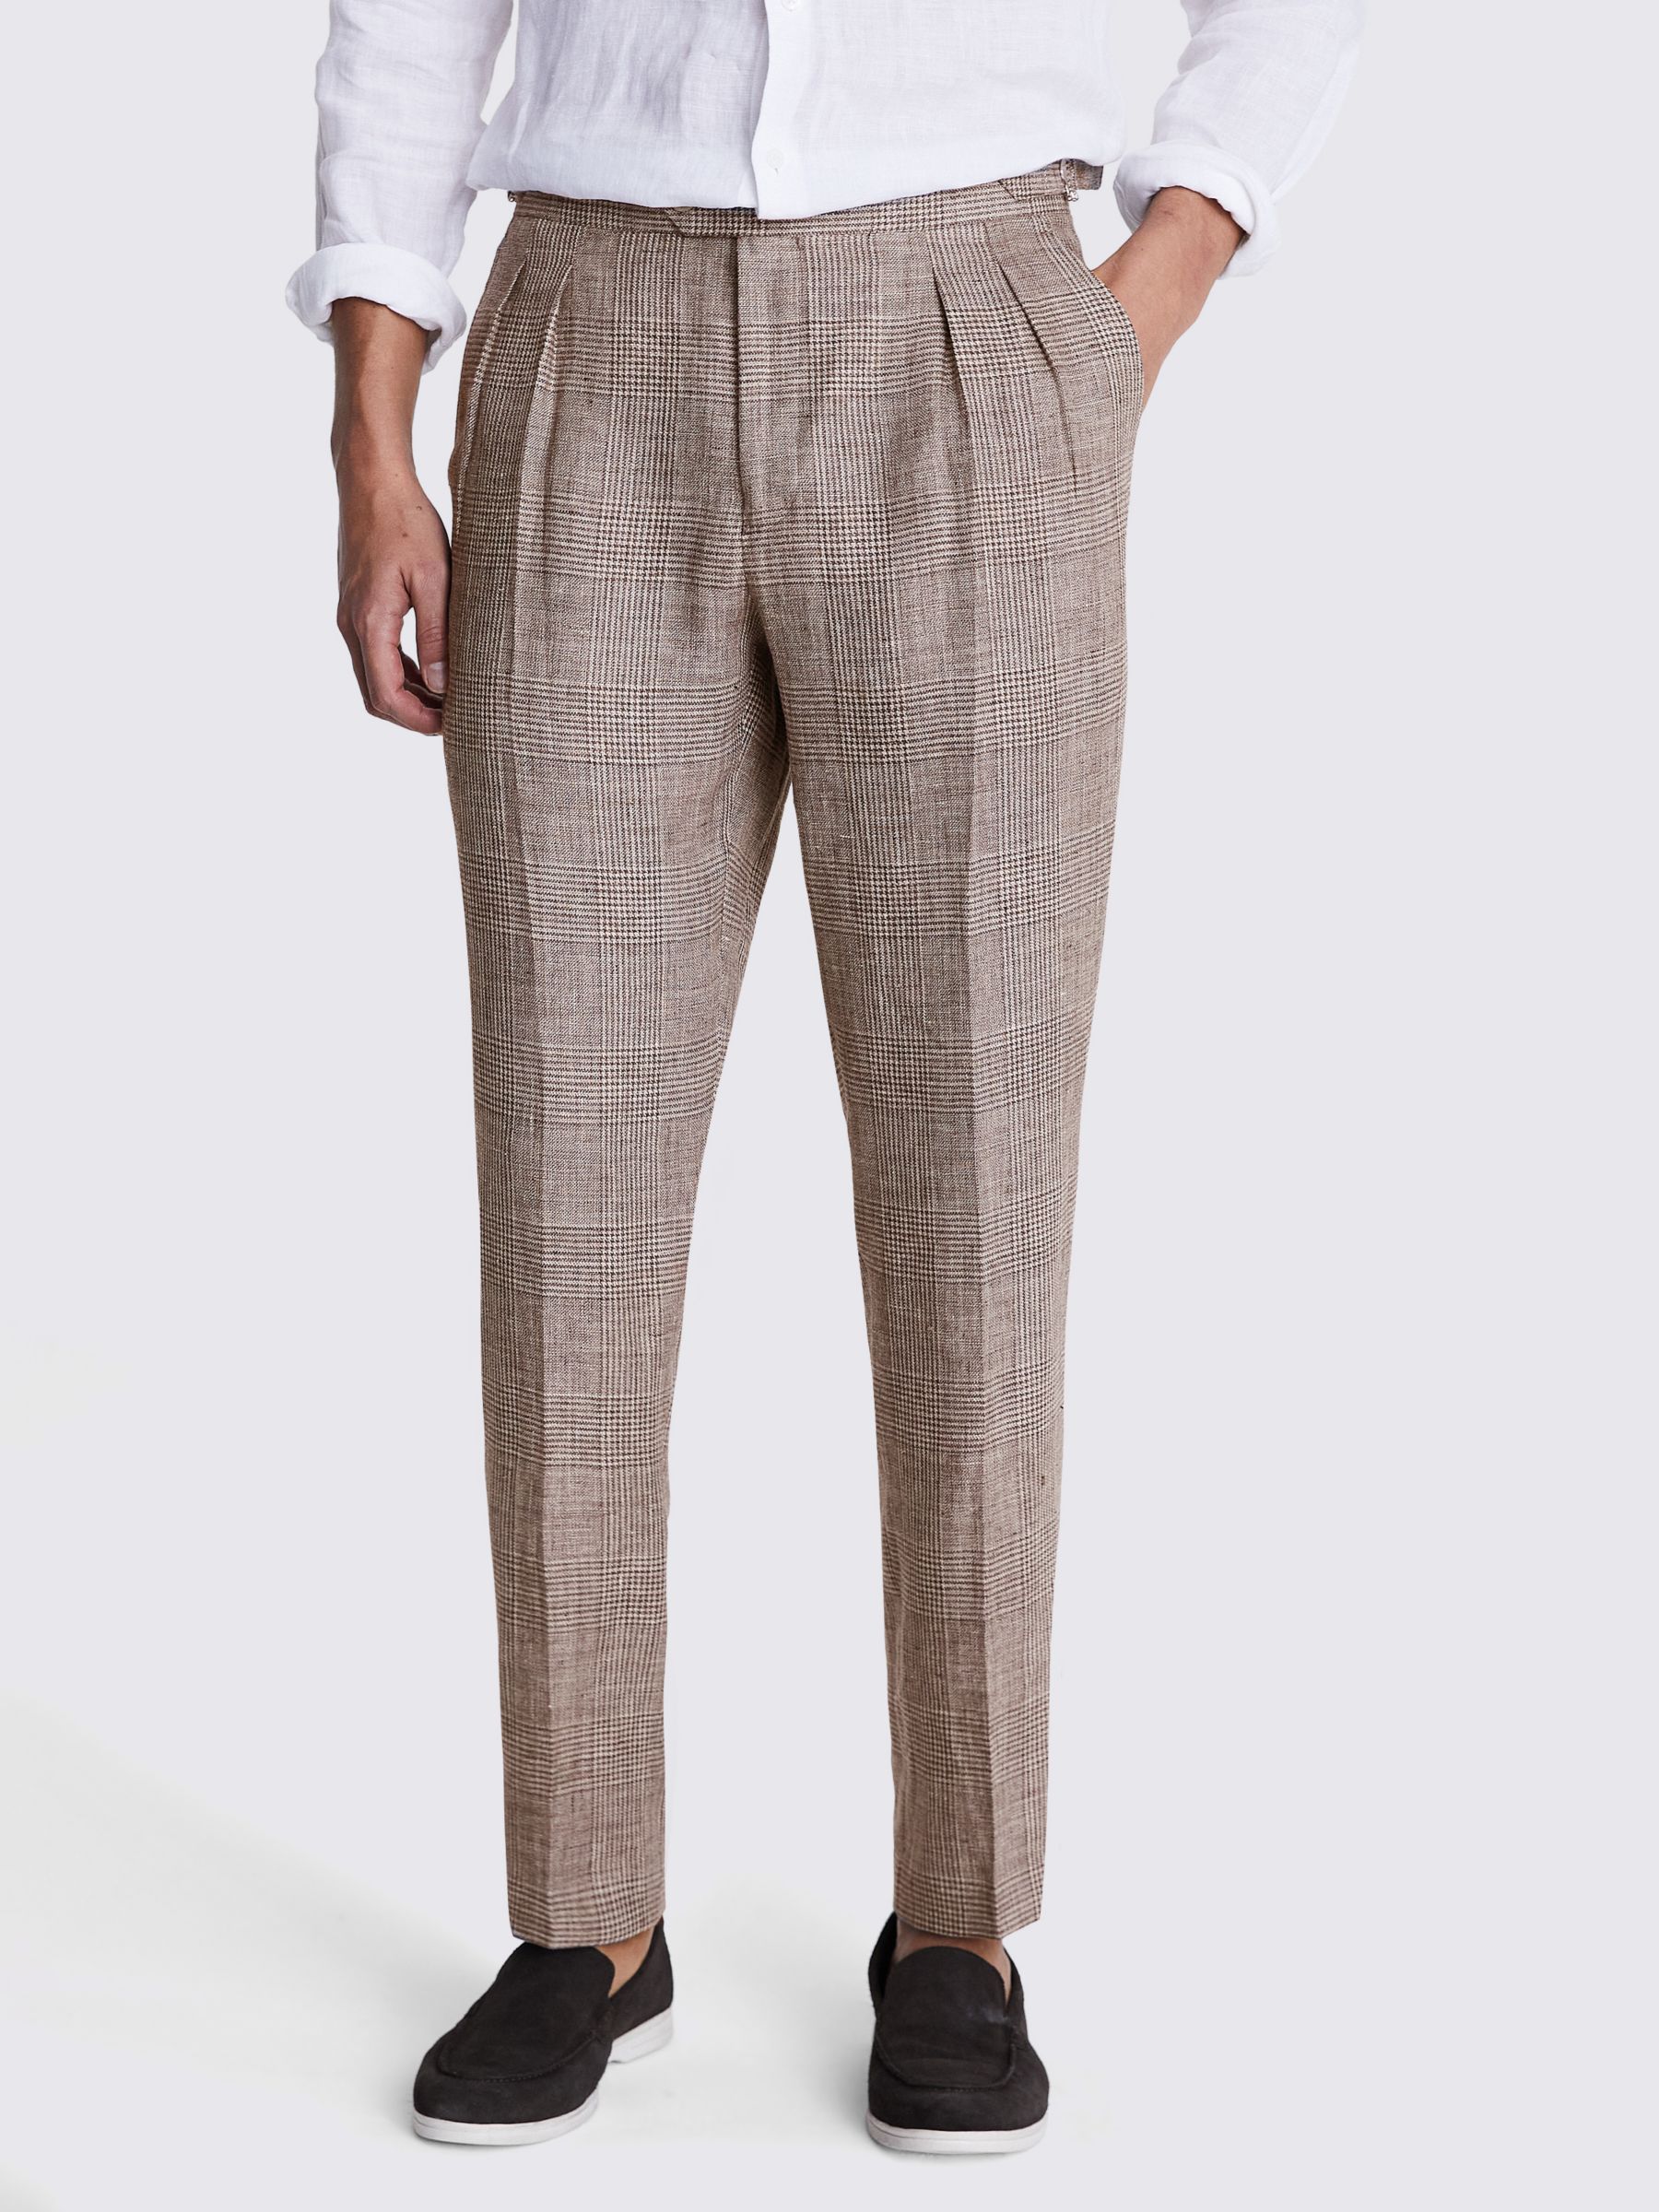 Moss Slim Fit Check Linen Suit Trousers, Brown, 40S